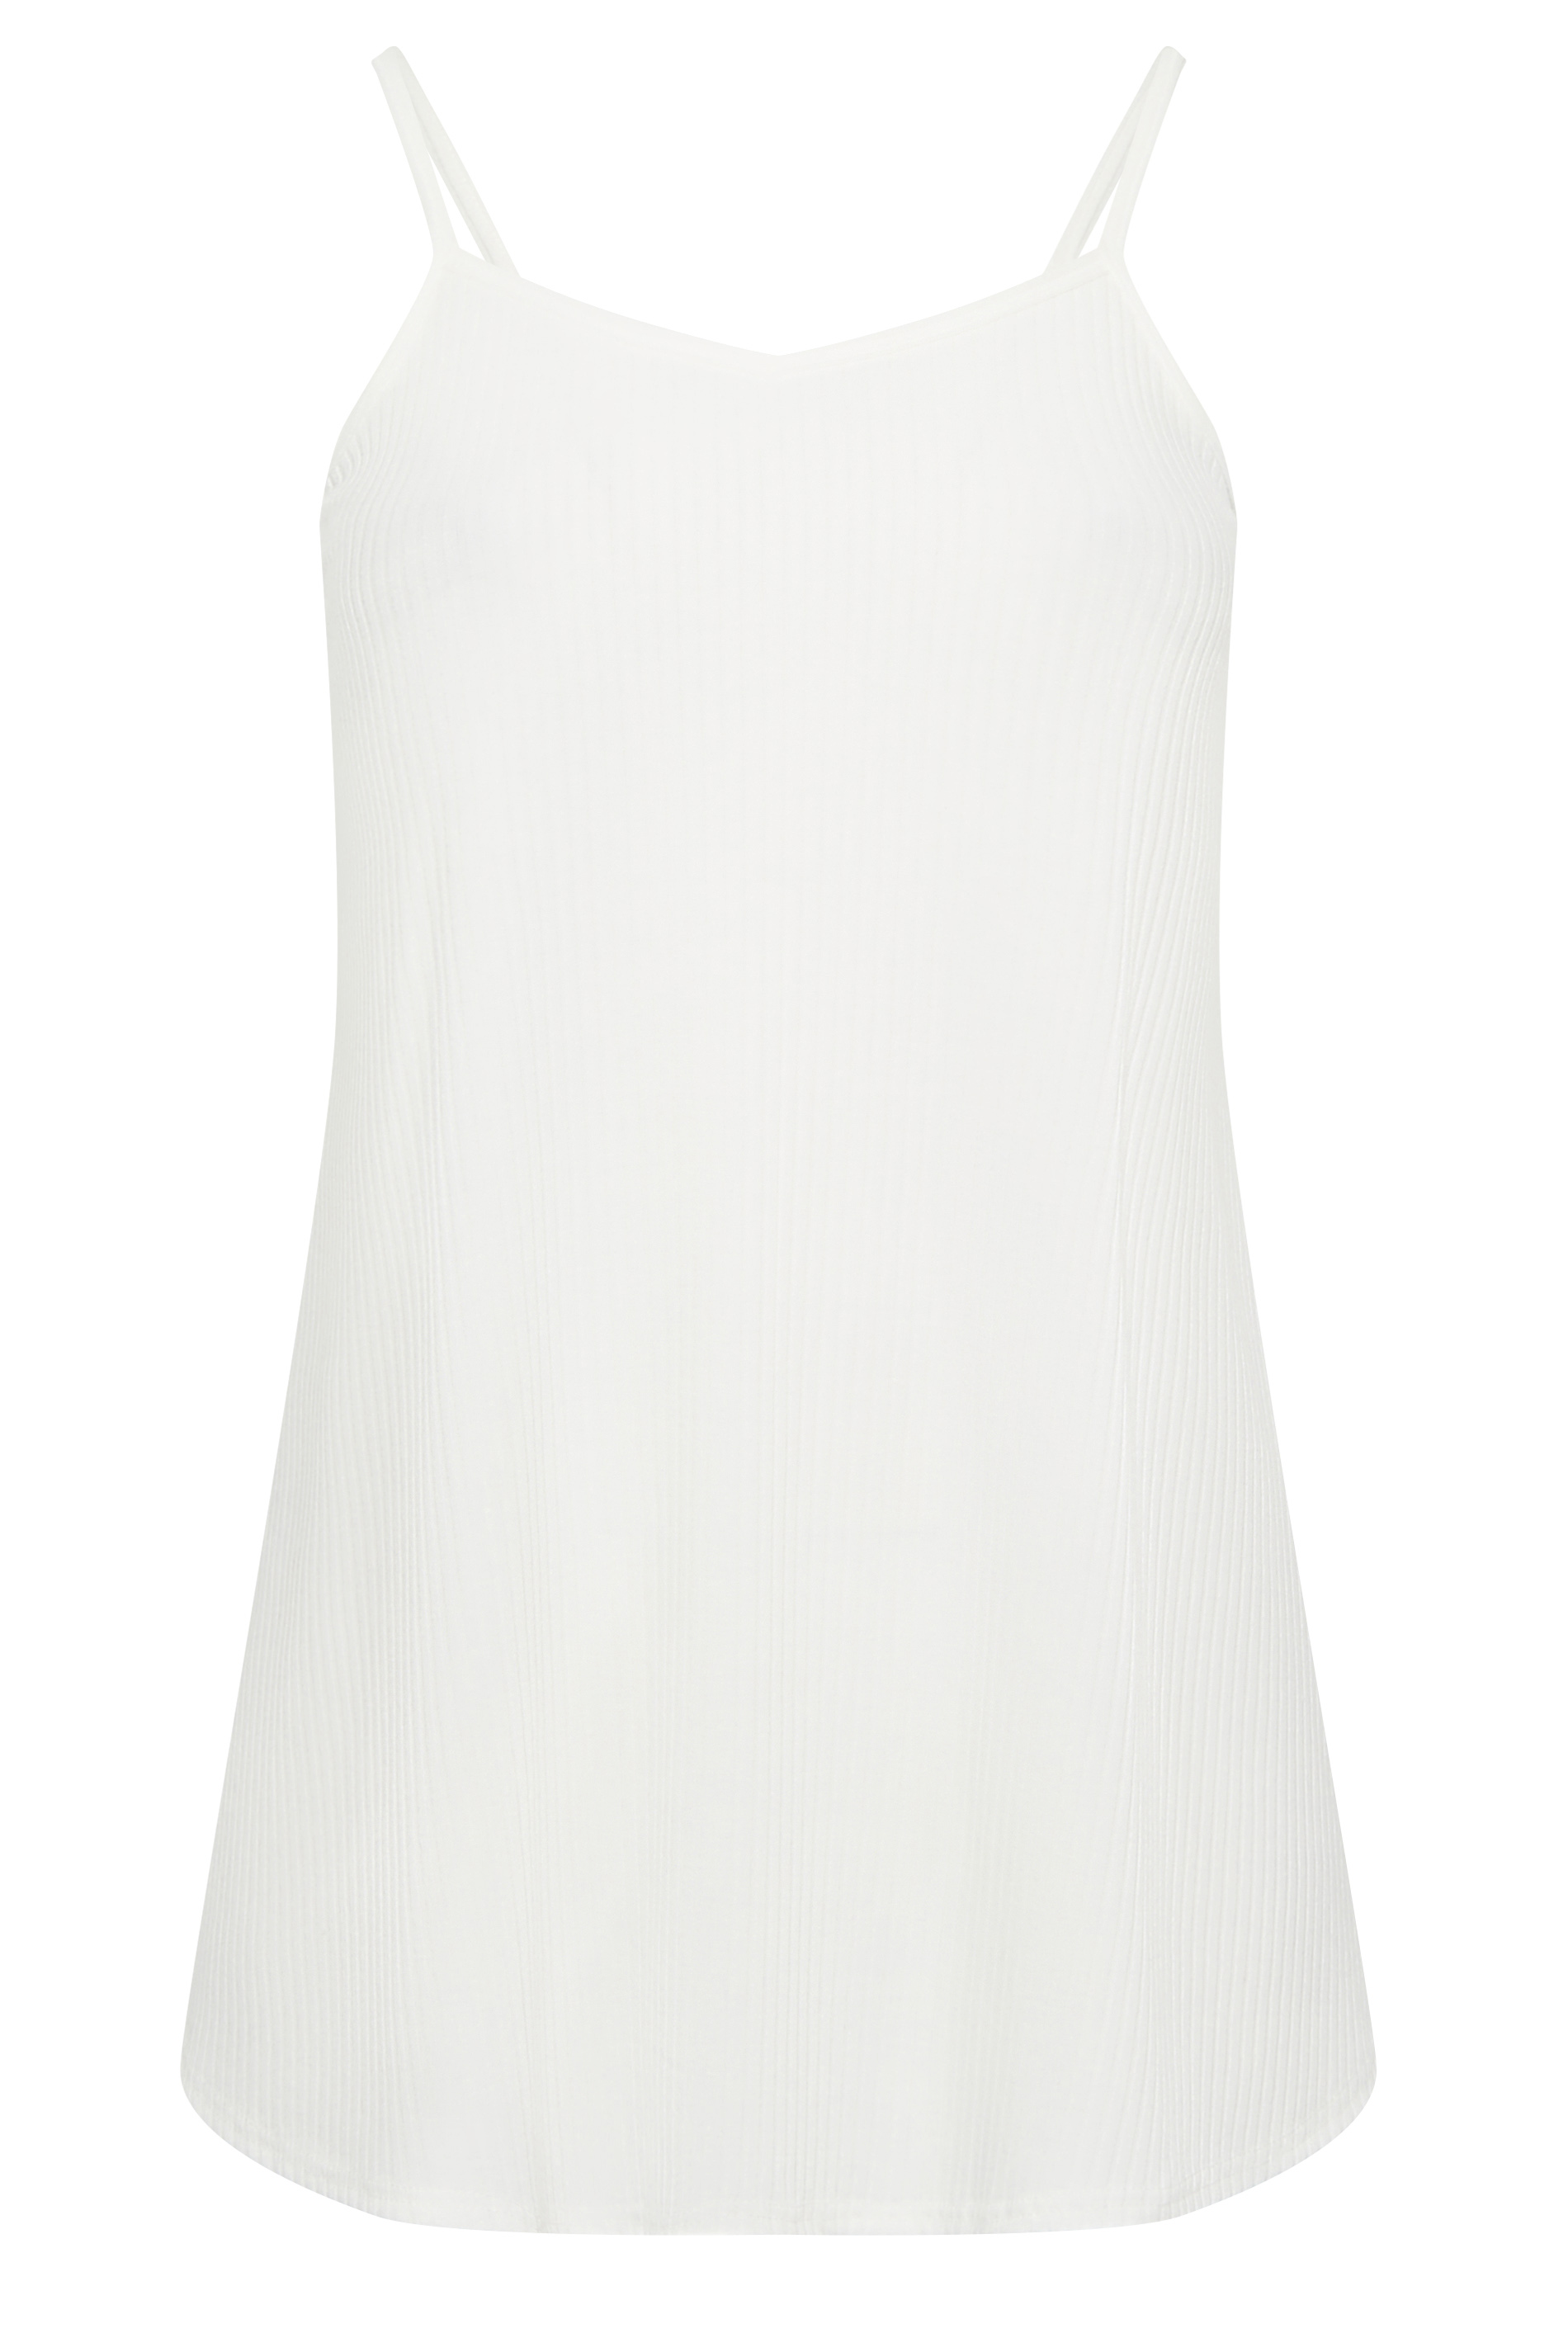 YOURS Curve Plus Size White Ribbed Swing Cami Top